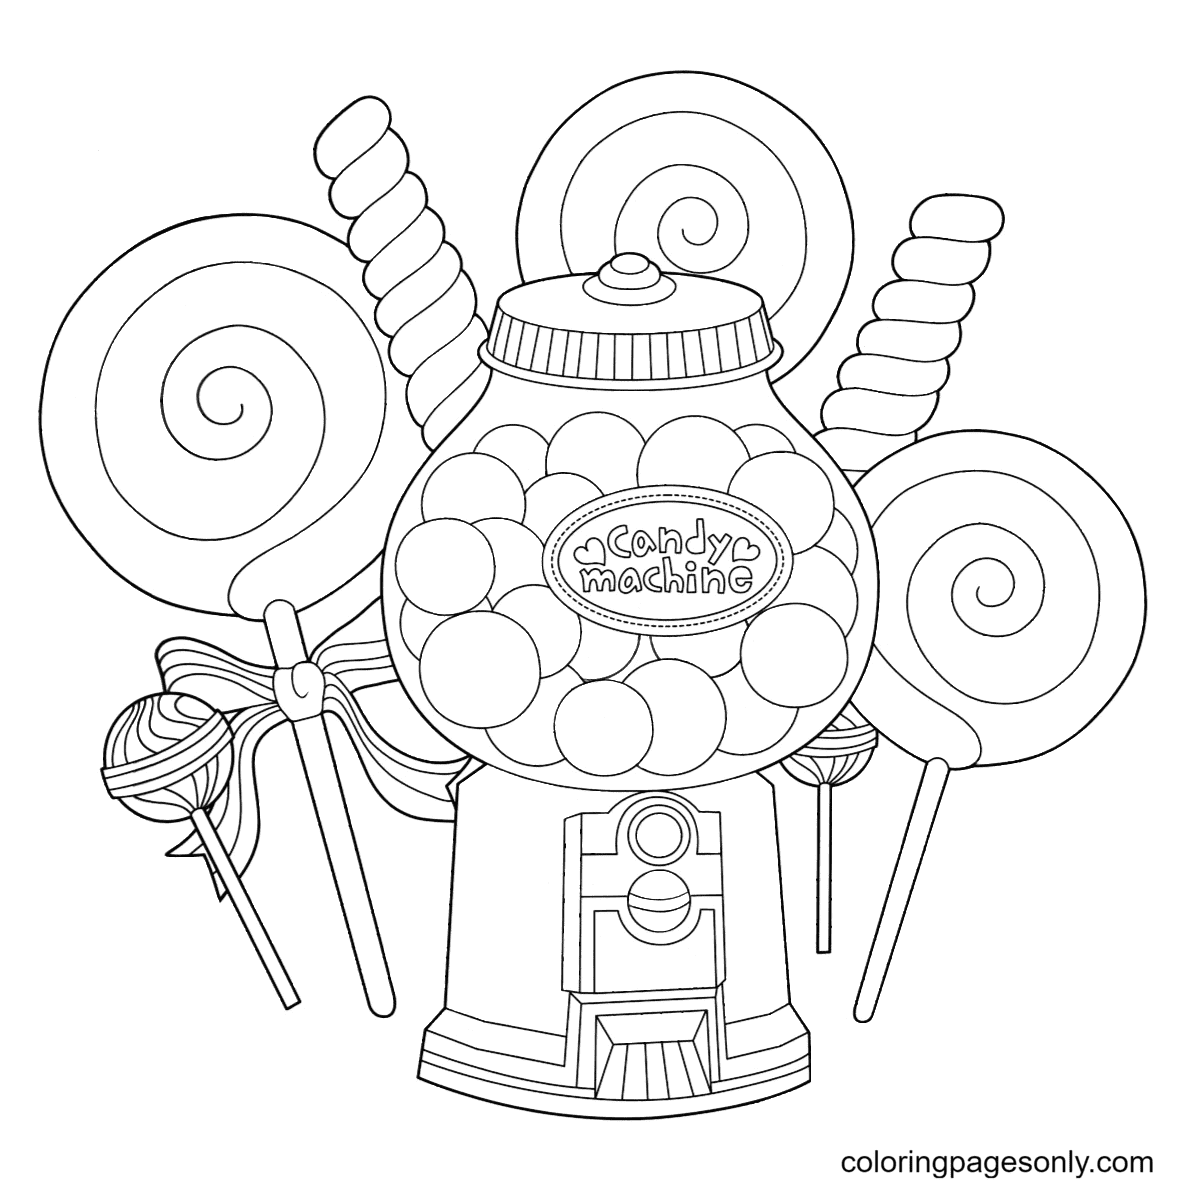 Candy Coloring Pages - Coloring Pages For Kids And Adults